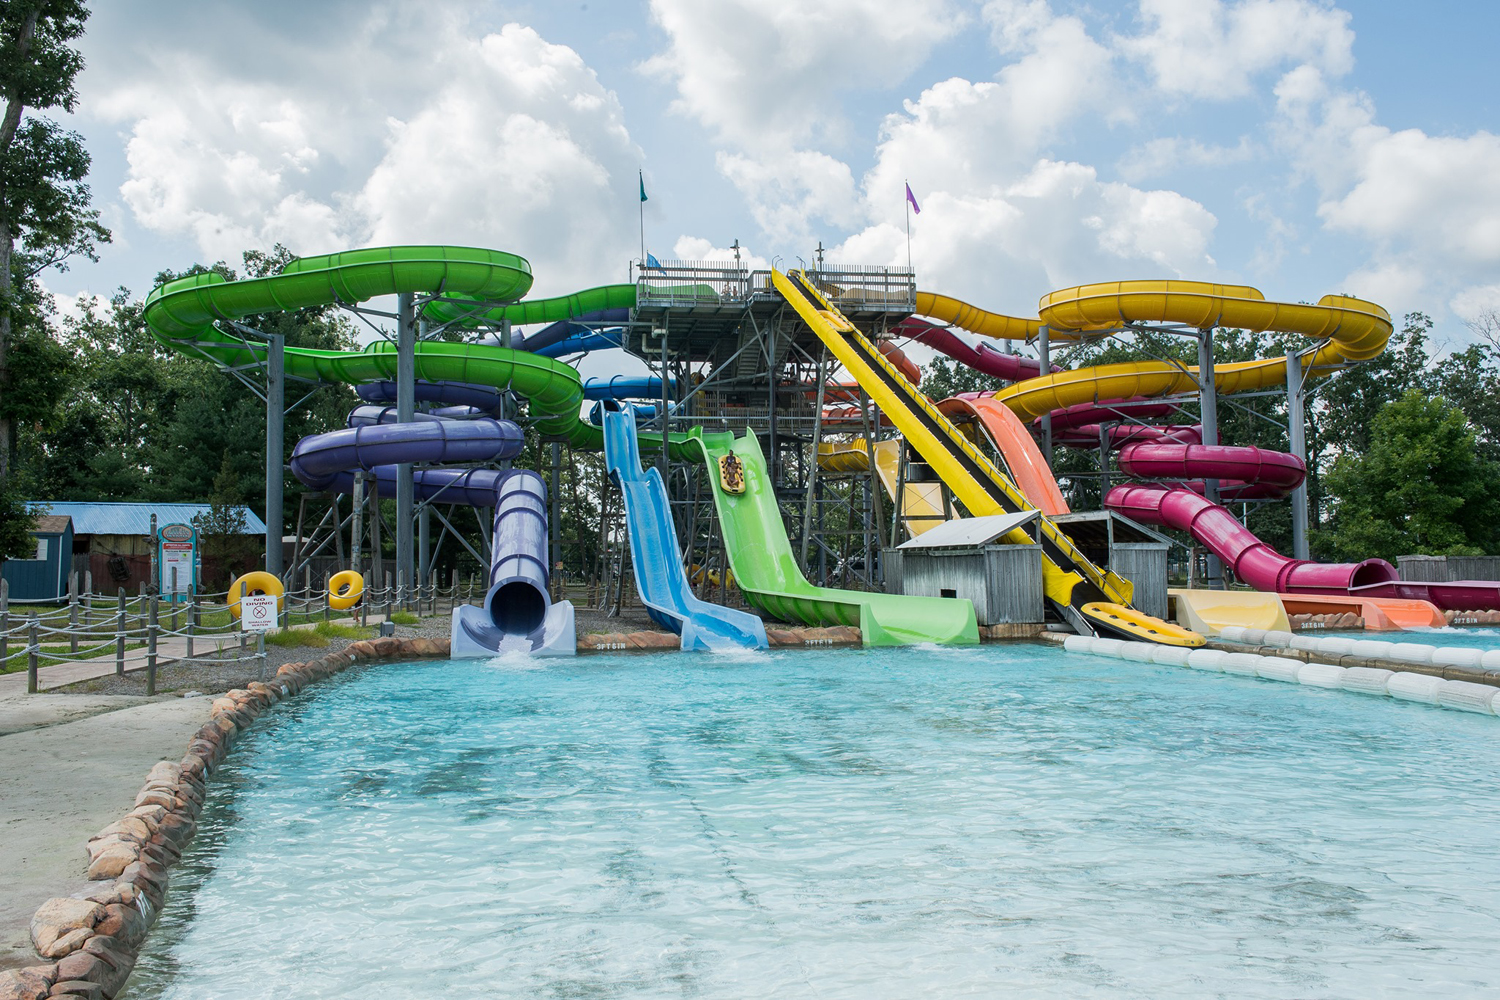 A colorful slide in Hurricane Harbor, New Jersey.